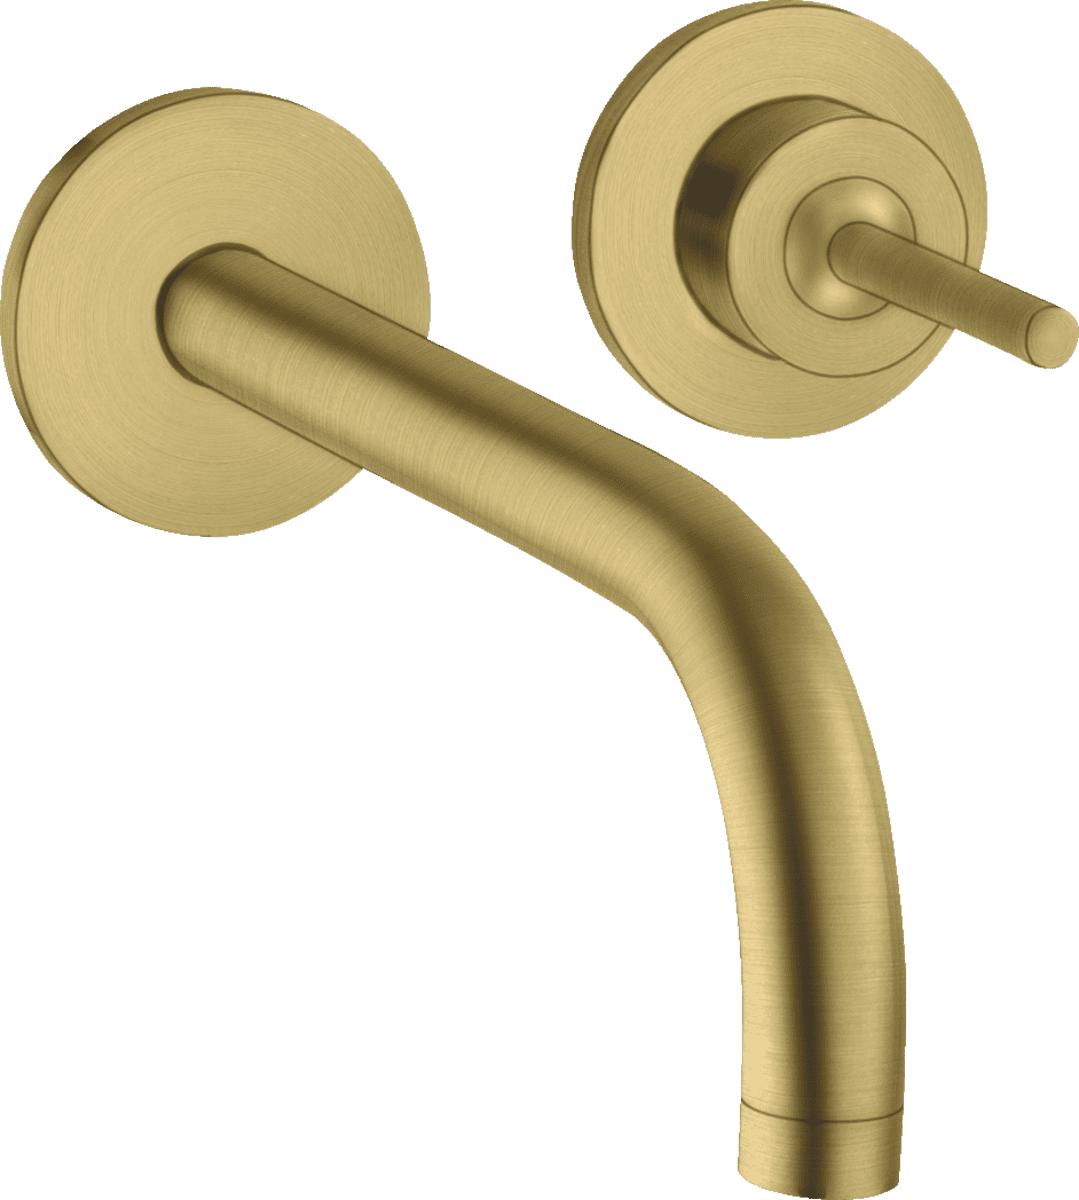 Picture of HANSGROHE AXOR Uno Single lever basin mixer for concealed installation wall-mounted with spout 225 mm and escutcheons #38116950 - Brushed Brass